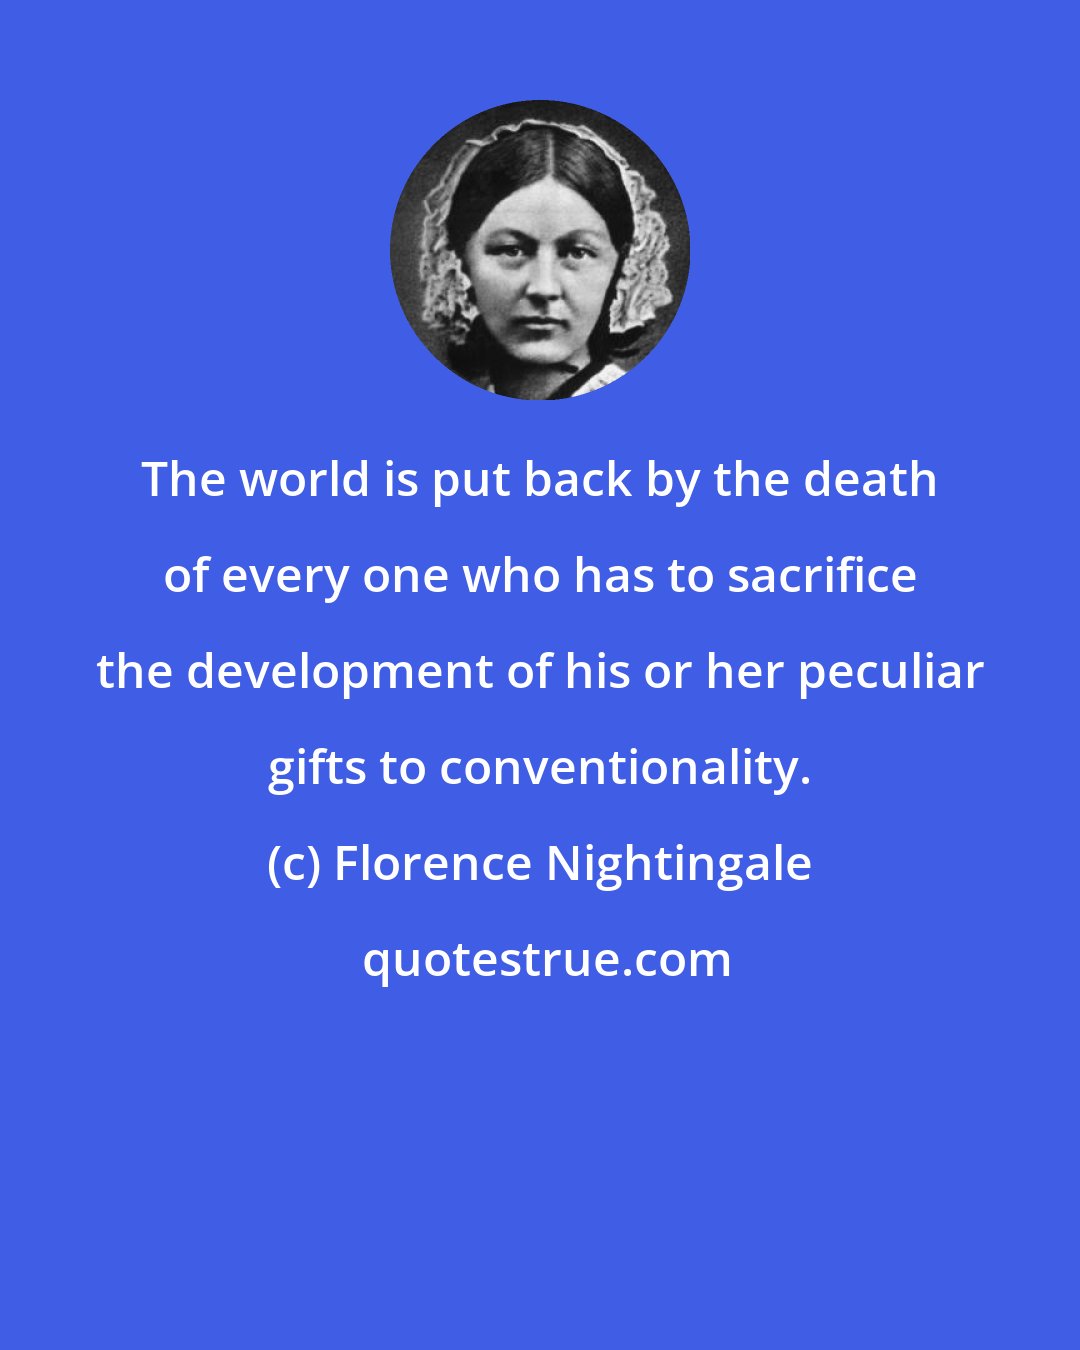 Florence Nightingale: The world is put back by the death of every one who has to sacrifice the development of his or her peculiar gifts to conventionality.